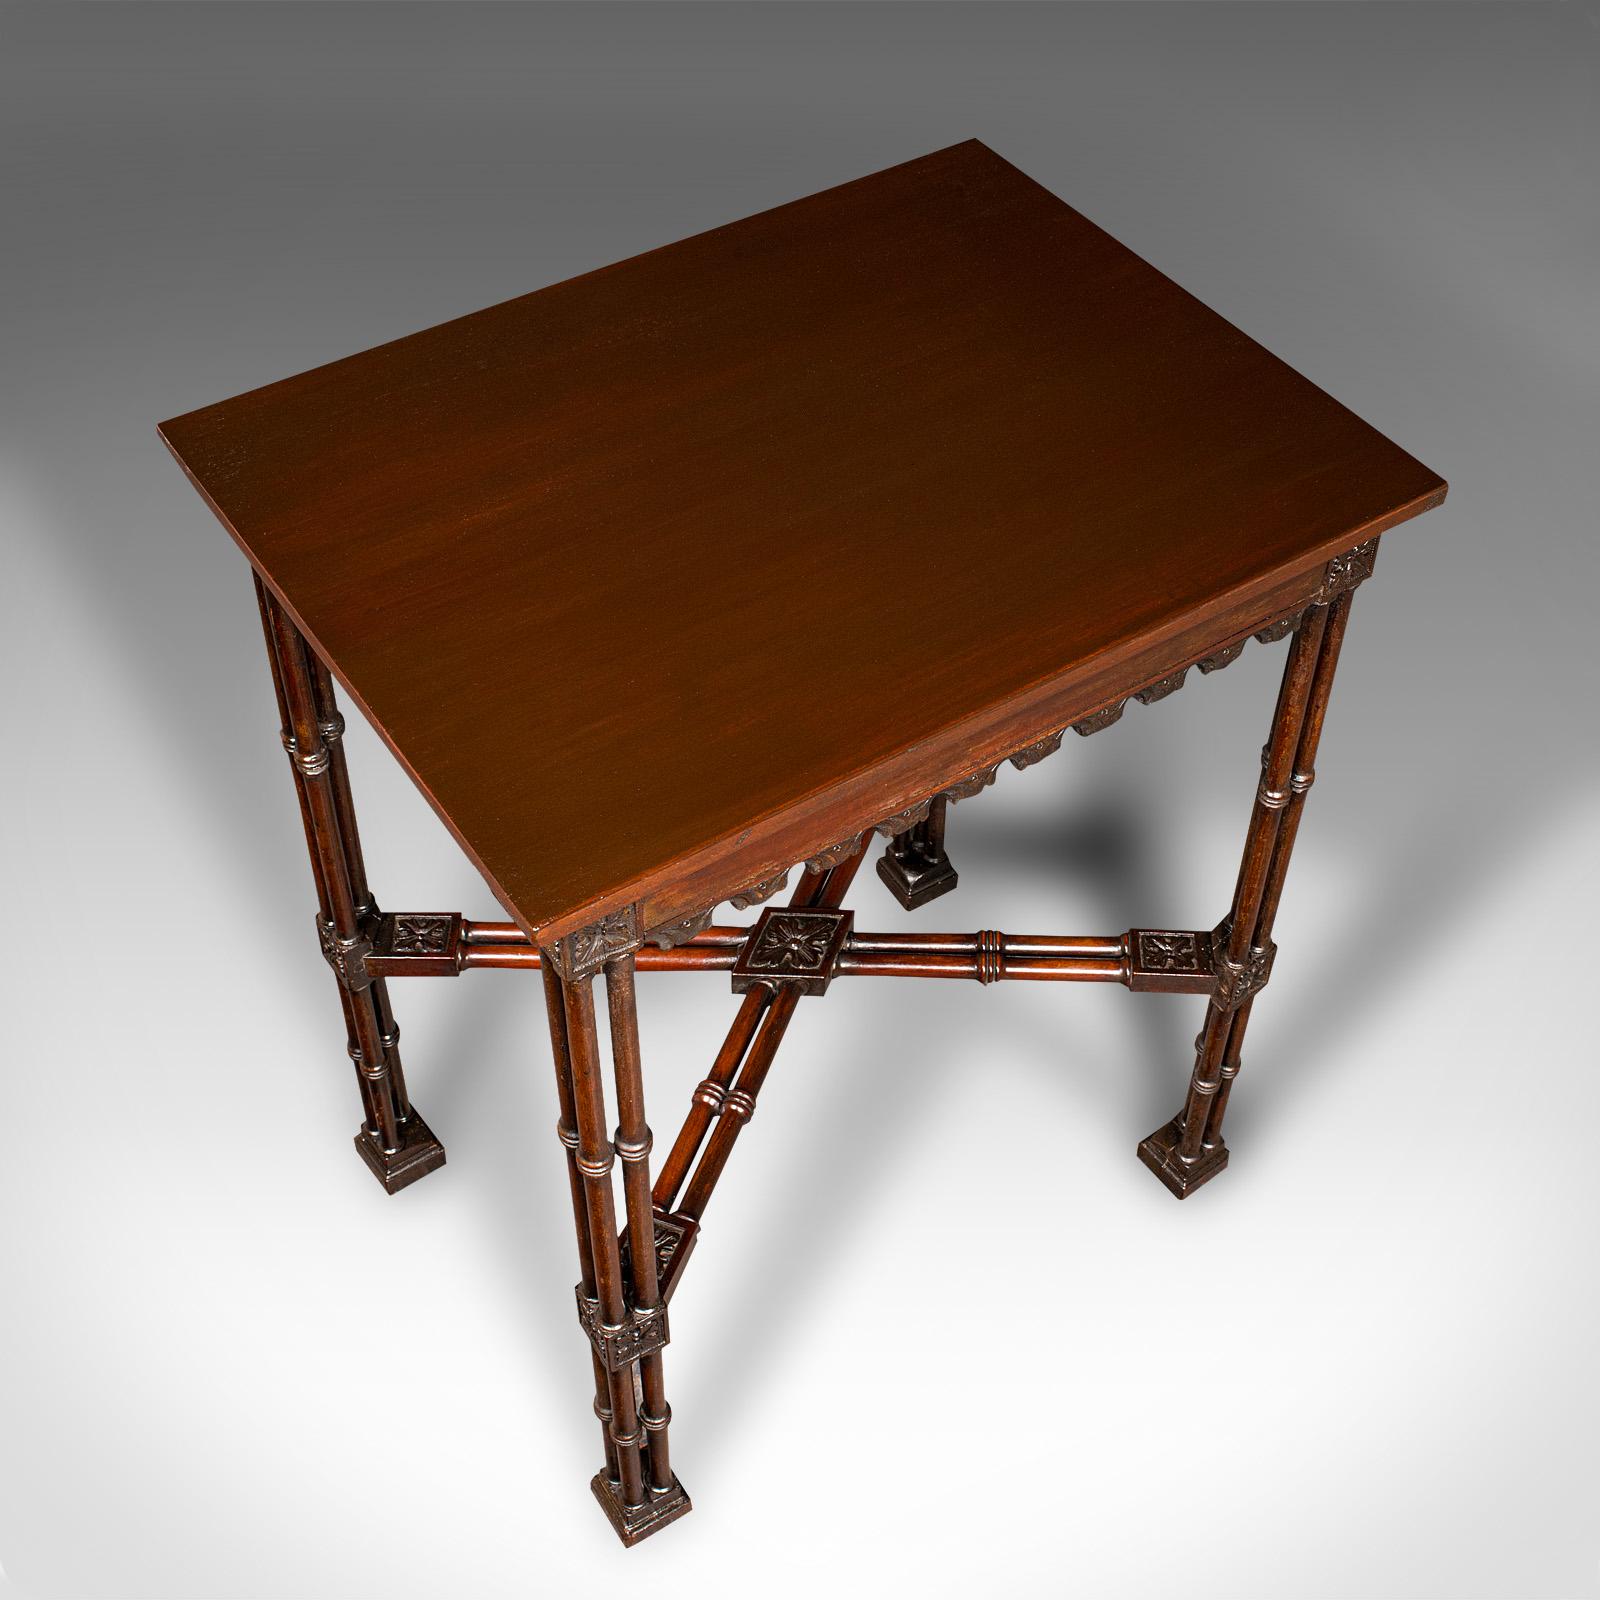 Wood Antique Side Table, English, Occasional, Chippendale Taste, Georgian, Circa 1800 For Sale